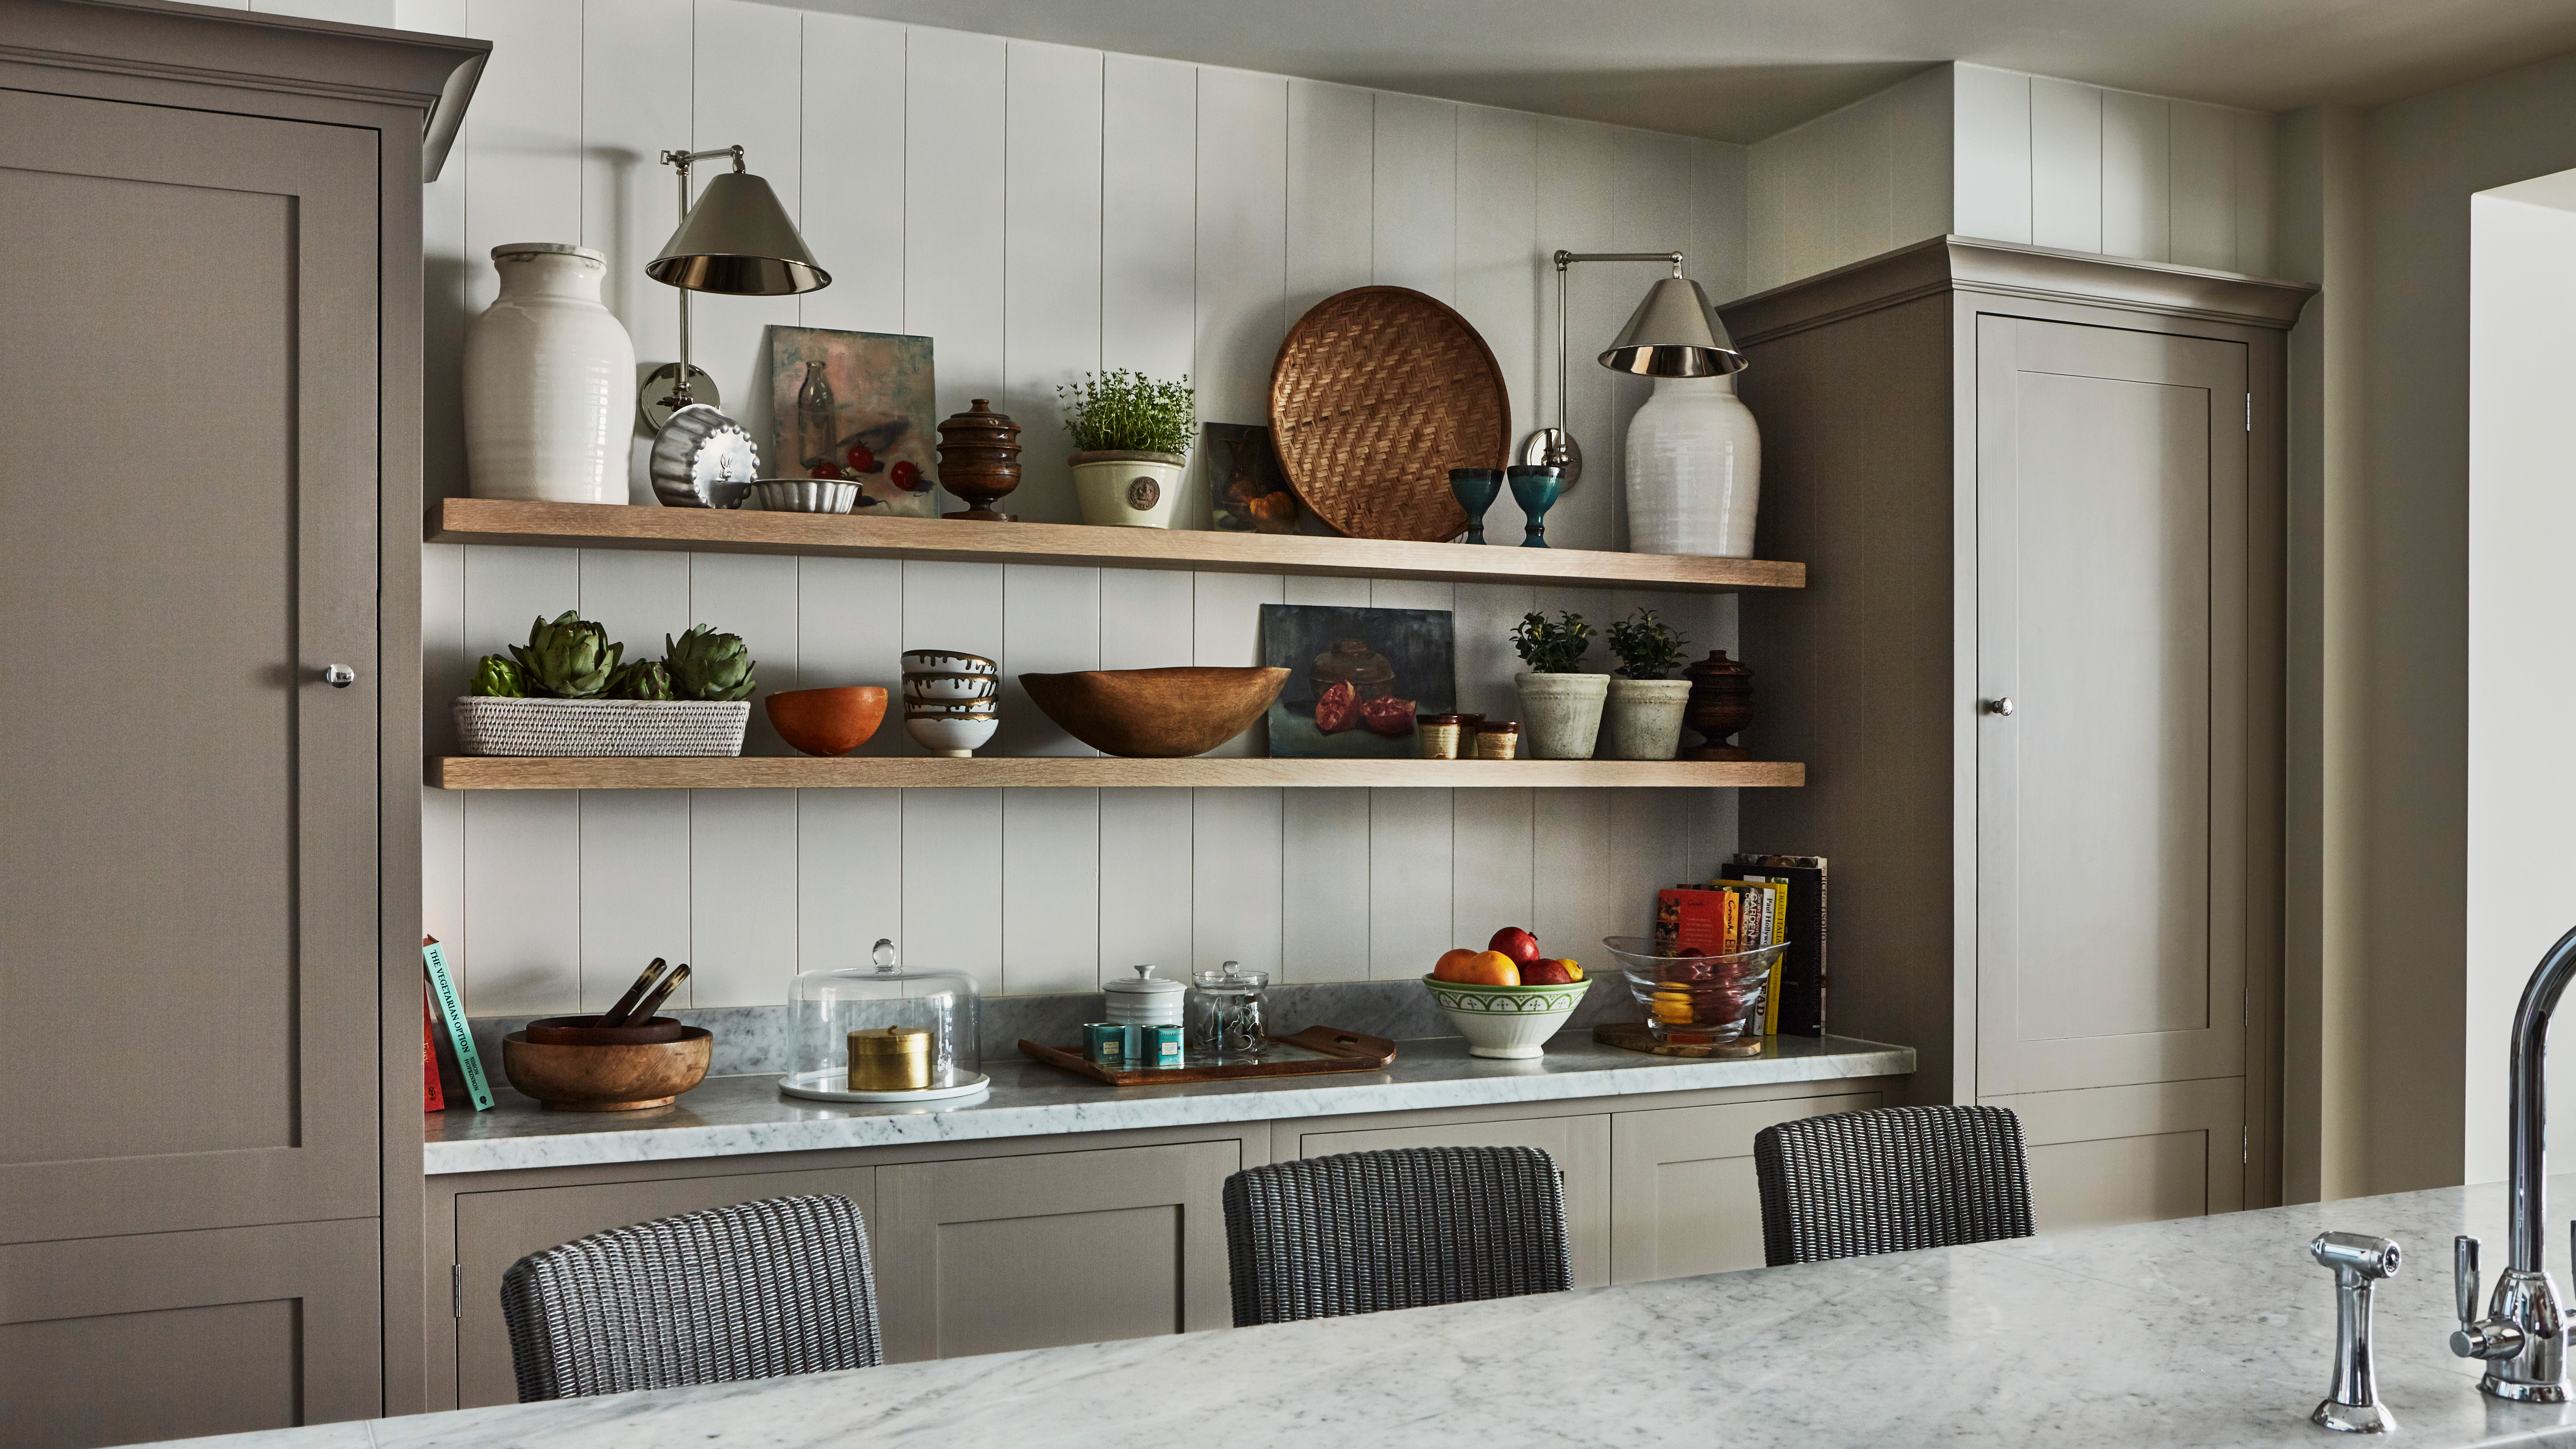 Kitchen Shelving Ideas 14 Ways To, How To Add Shelves Between Cabinets